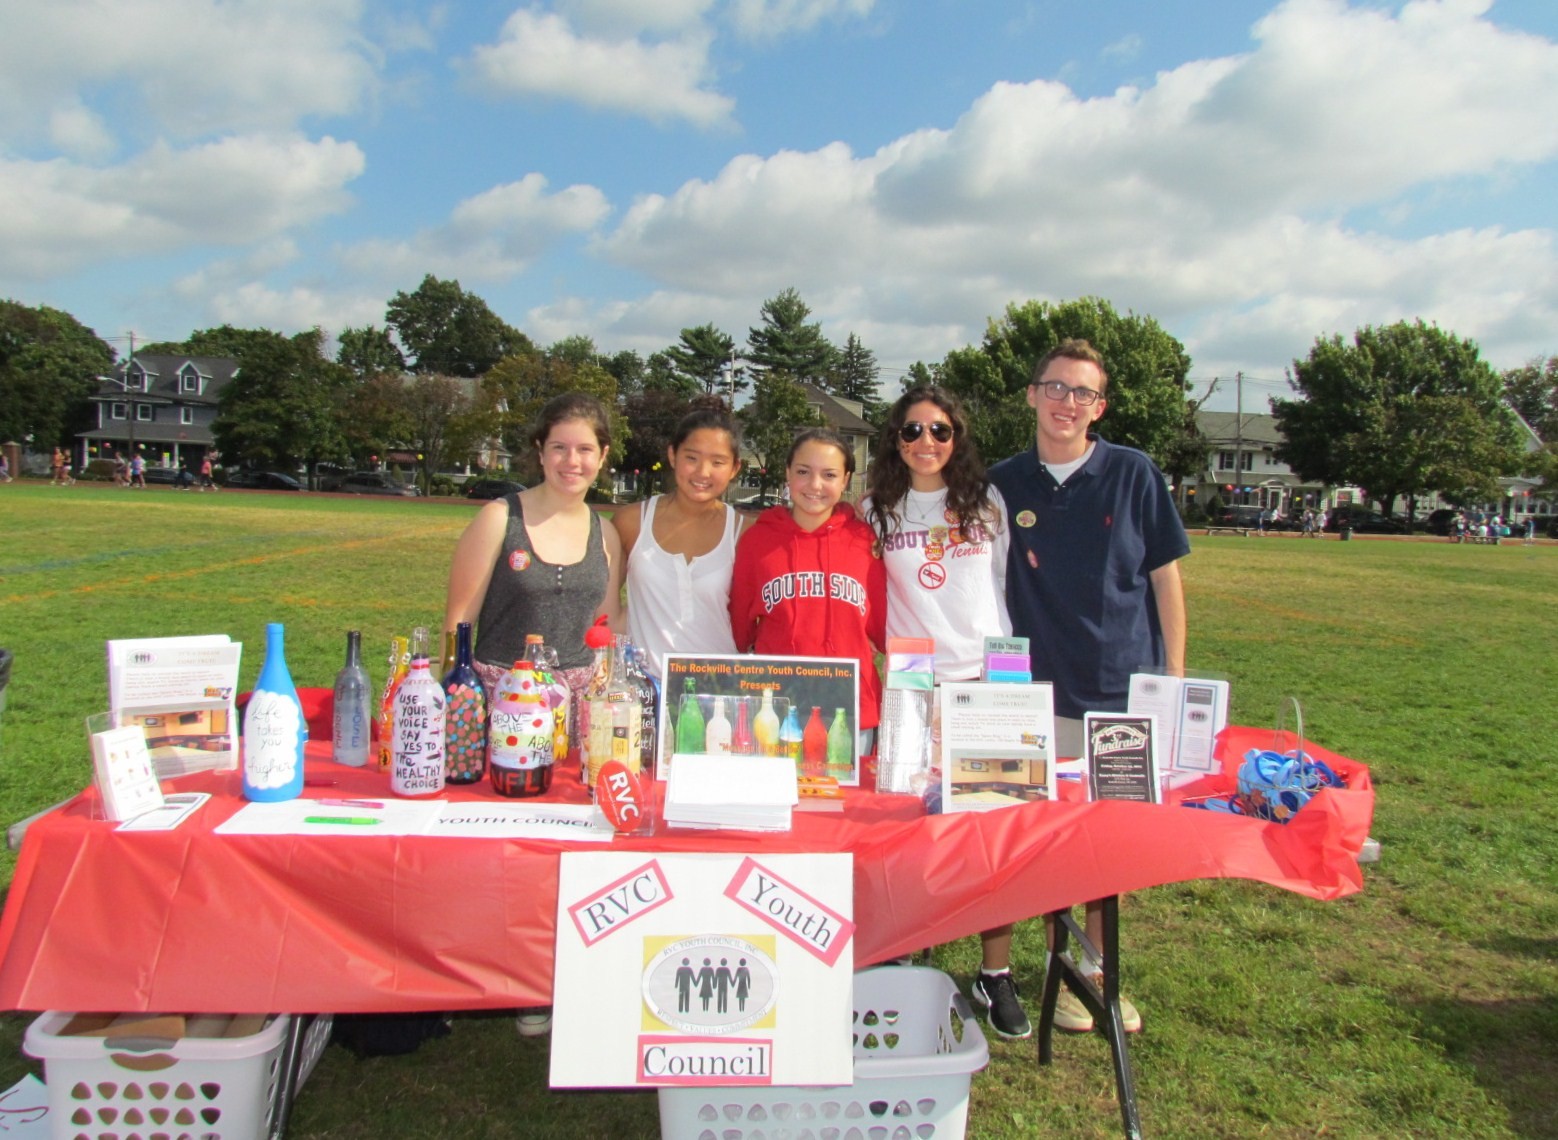 Members of the Rockville Centre Youth Council were distributing information about the organization to people at the Family Fun and Fitness Fair.